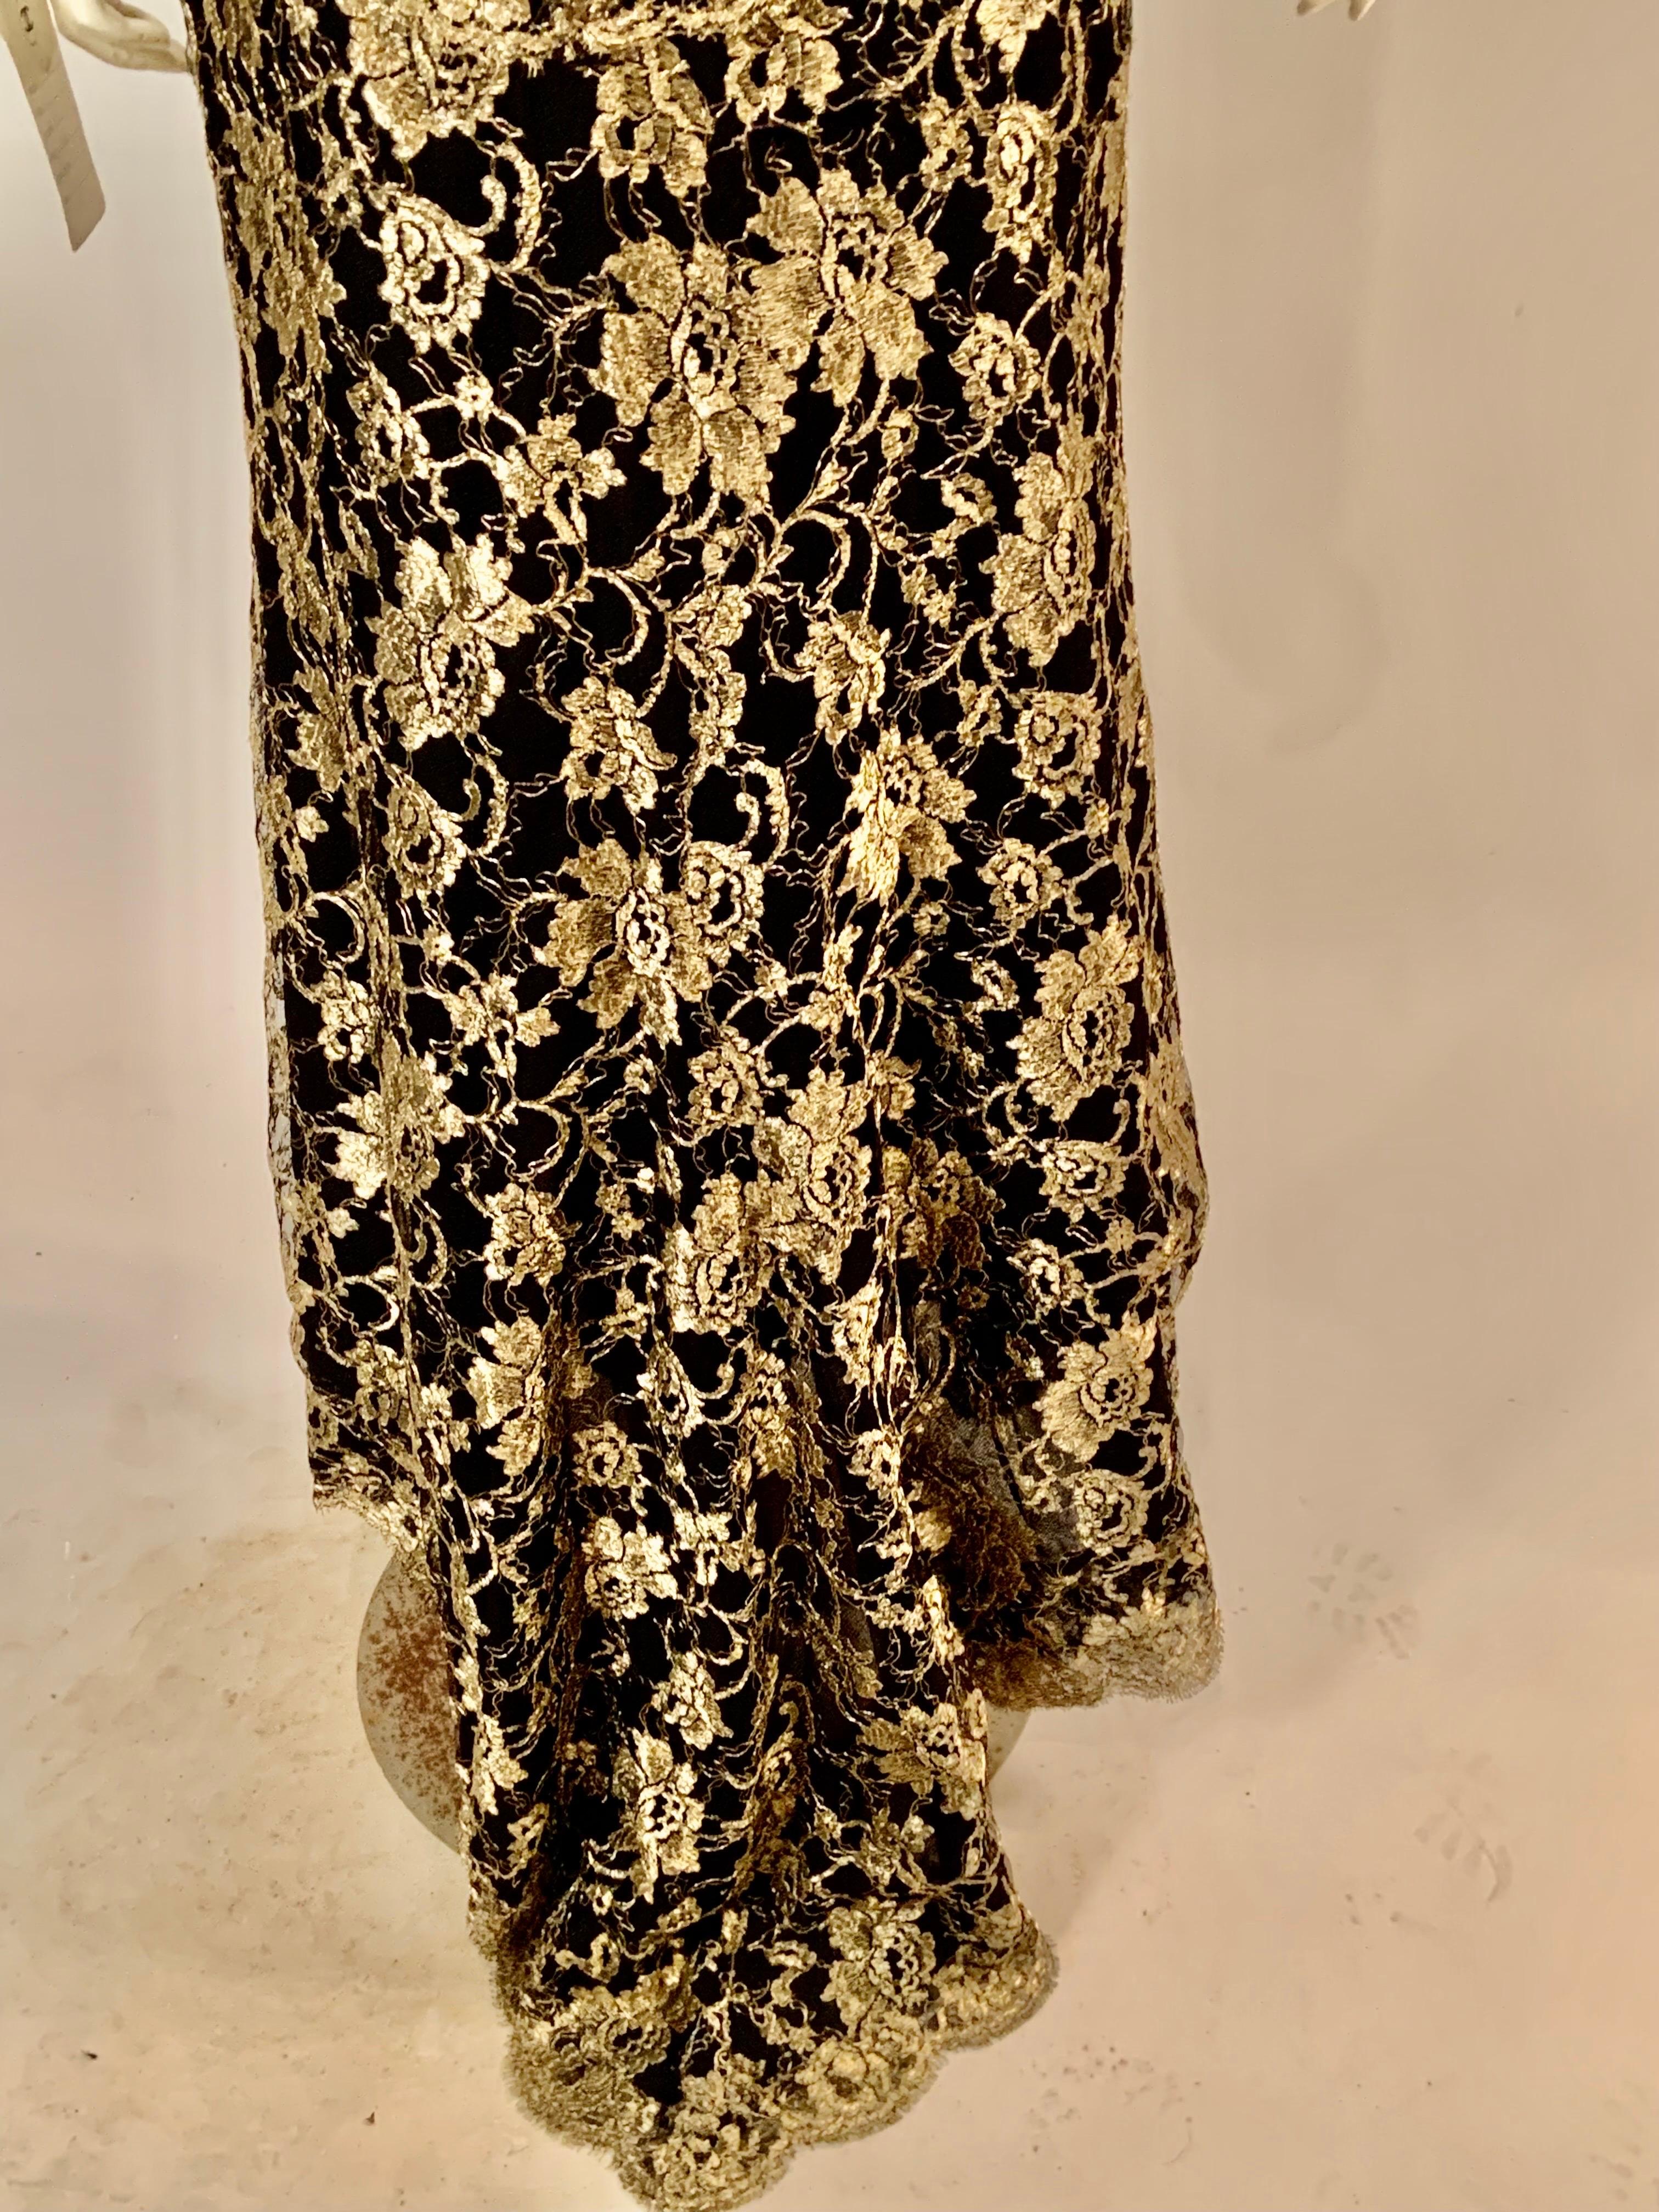 1986 Chanel by Karl Lagerfeld Gold and Black Lace Gown with Train Original Tag For Sale 10